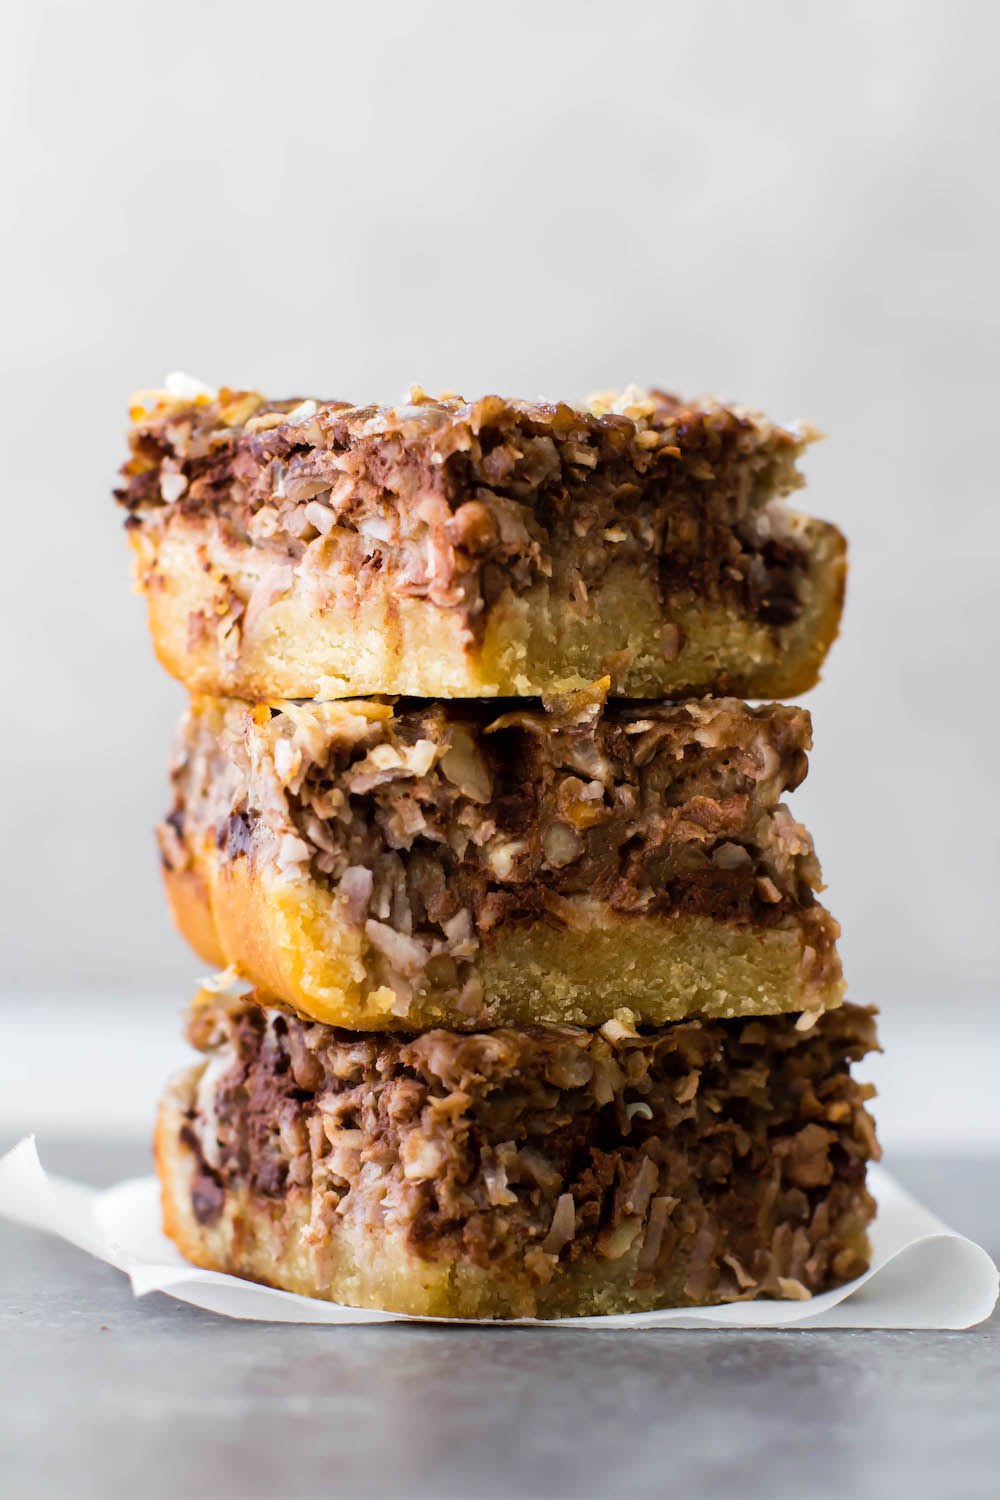 These magical cookie bars are completely vegan, using substitutes for classic dairy ingredients